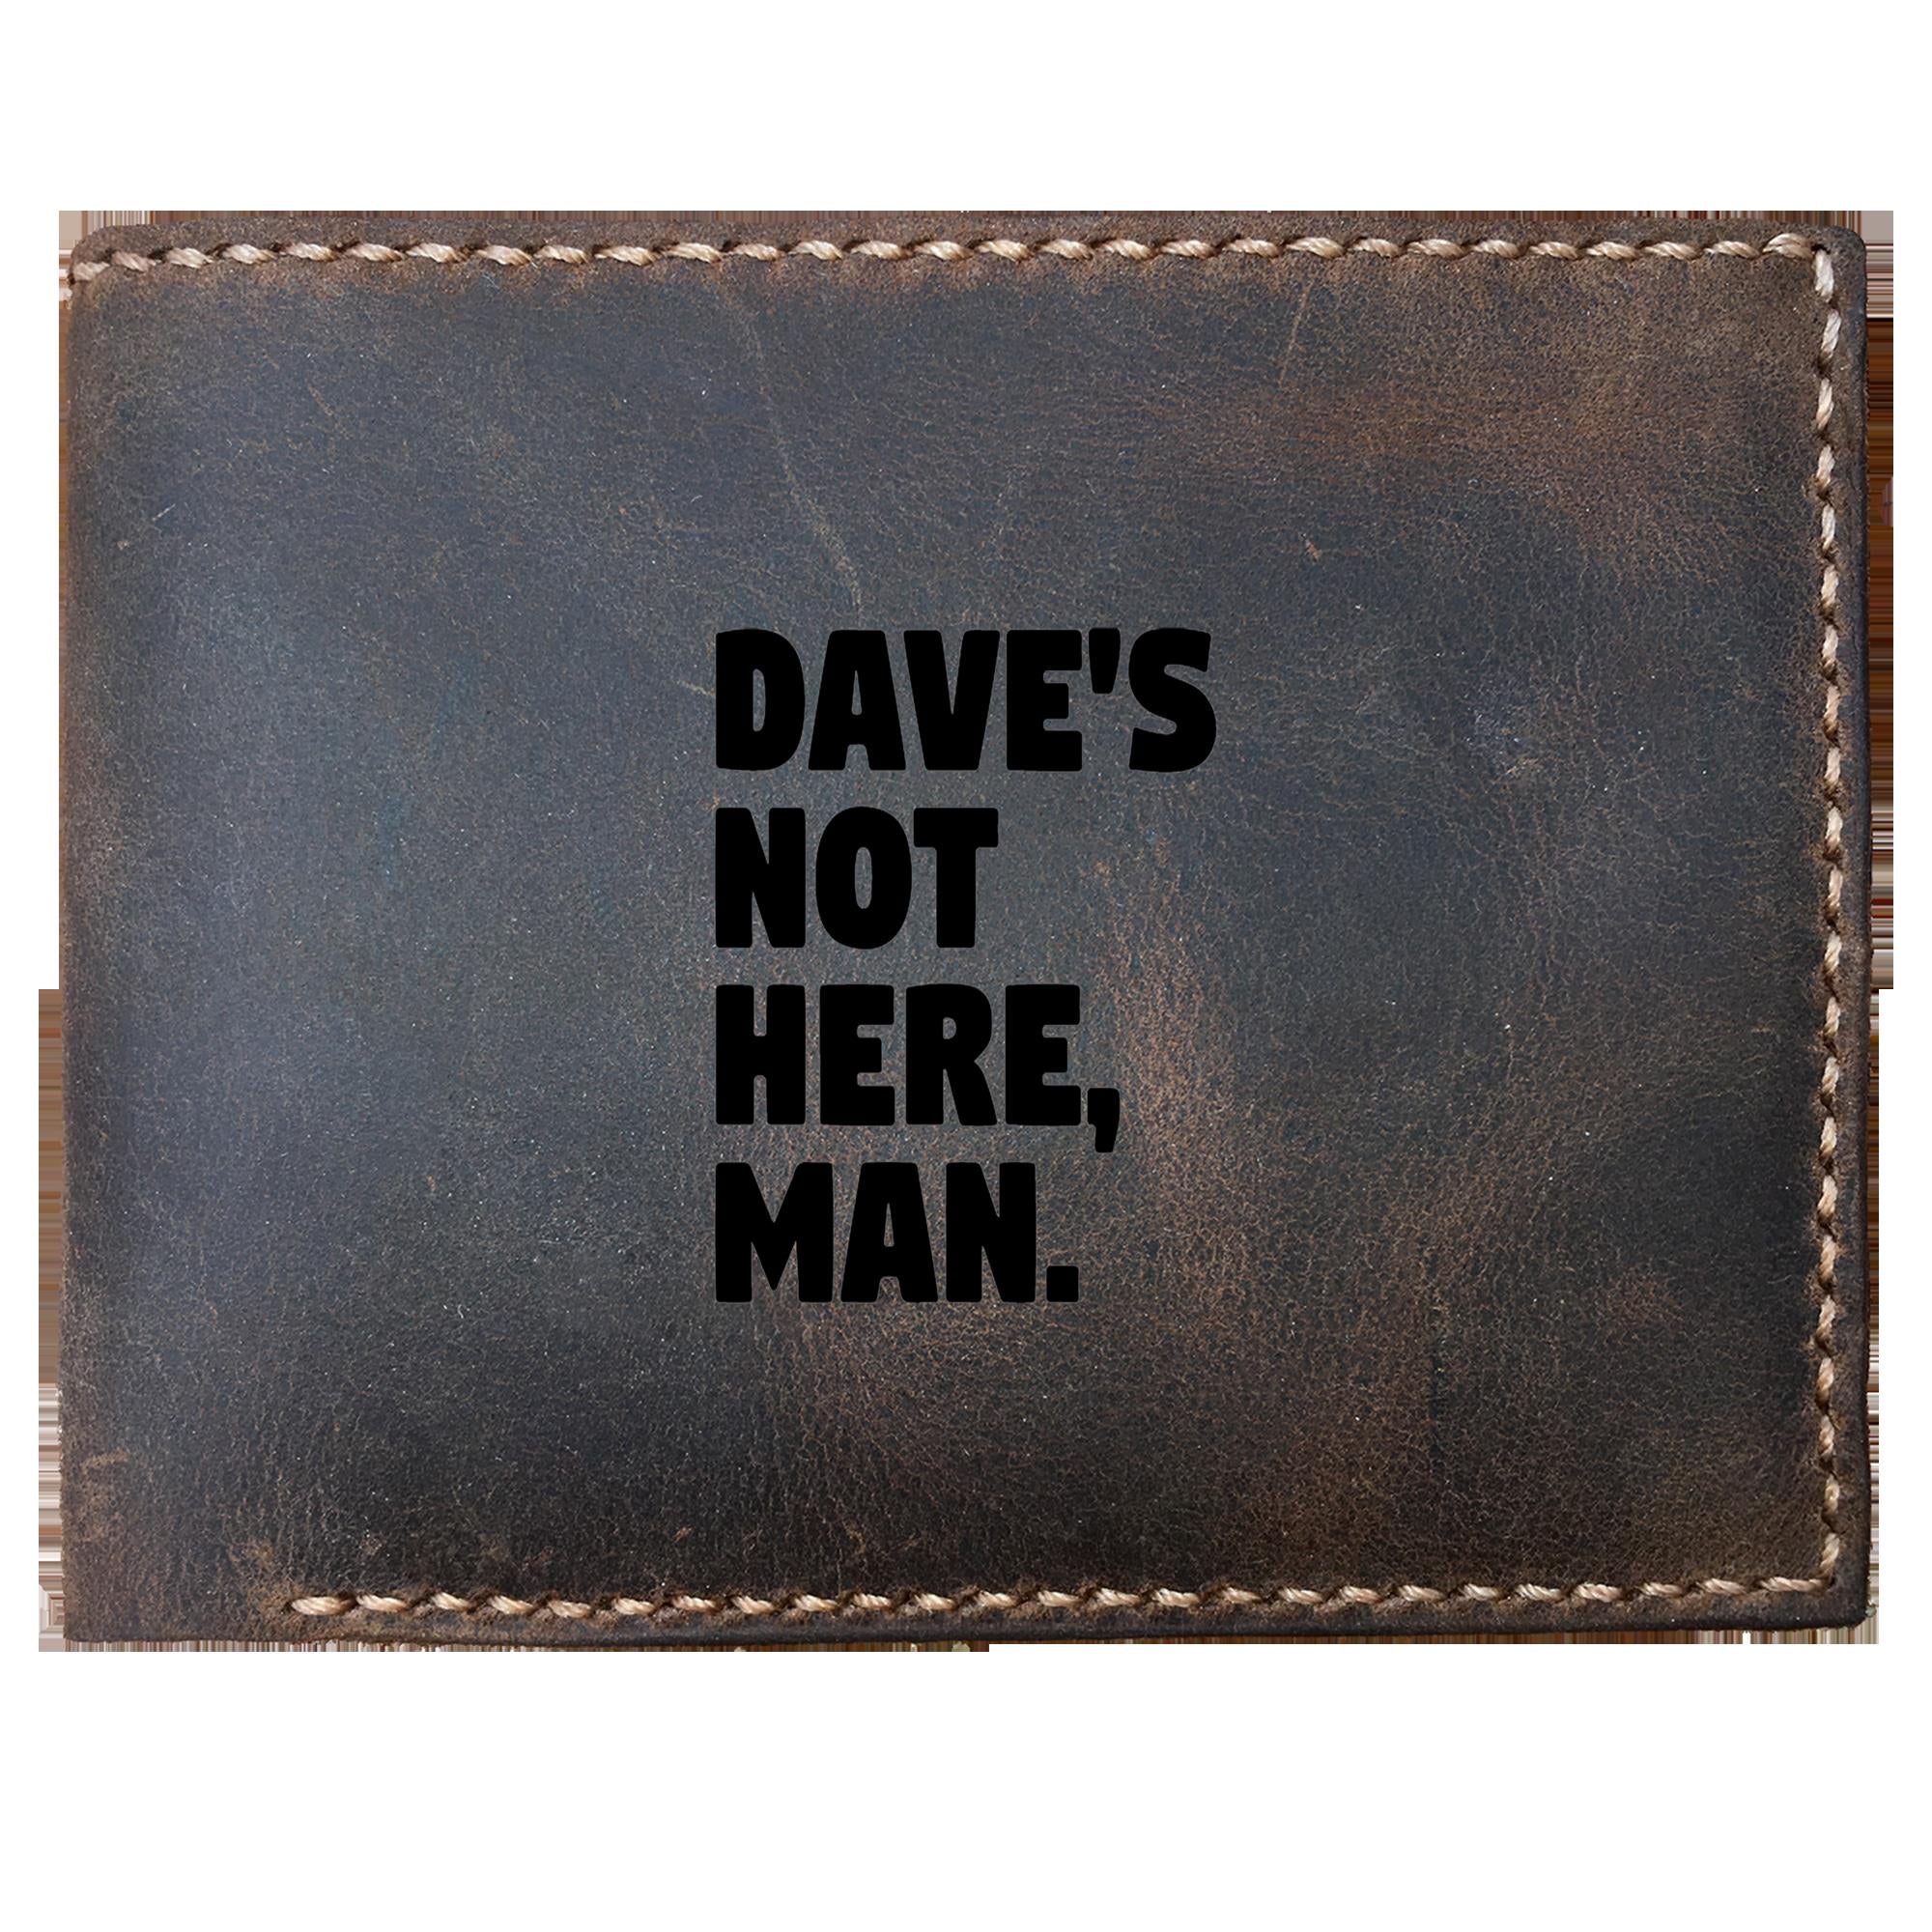 Skitongifts Funny Custom Laser Engraved Bifold Leather Wallet For Men, Dave's Not Here, Man